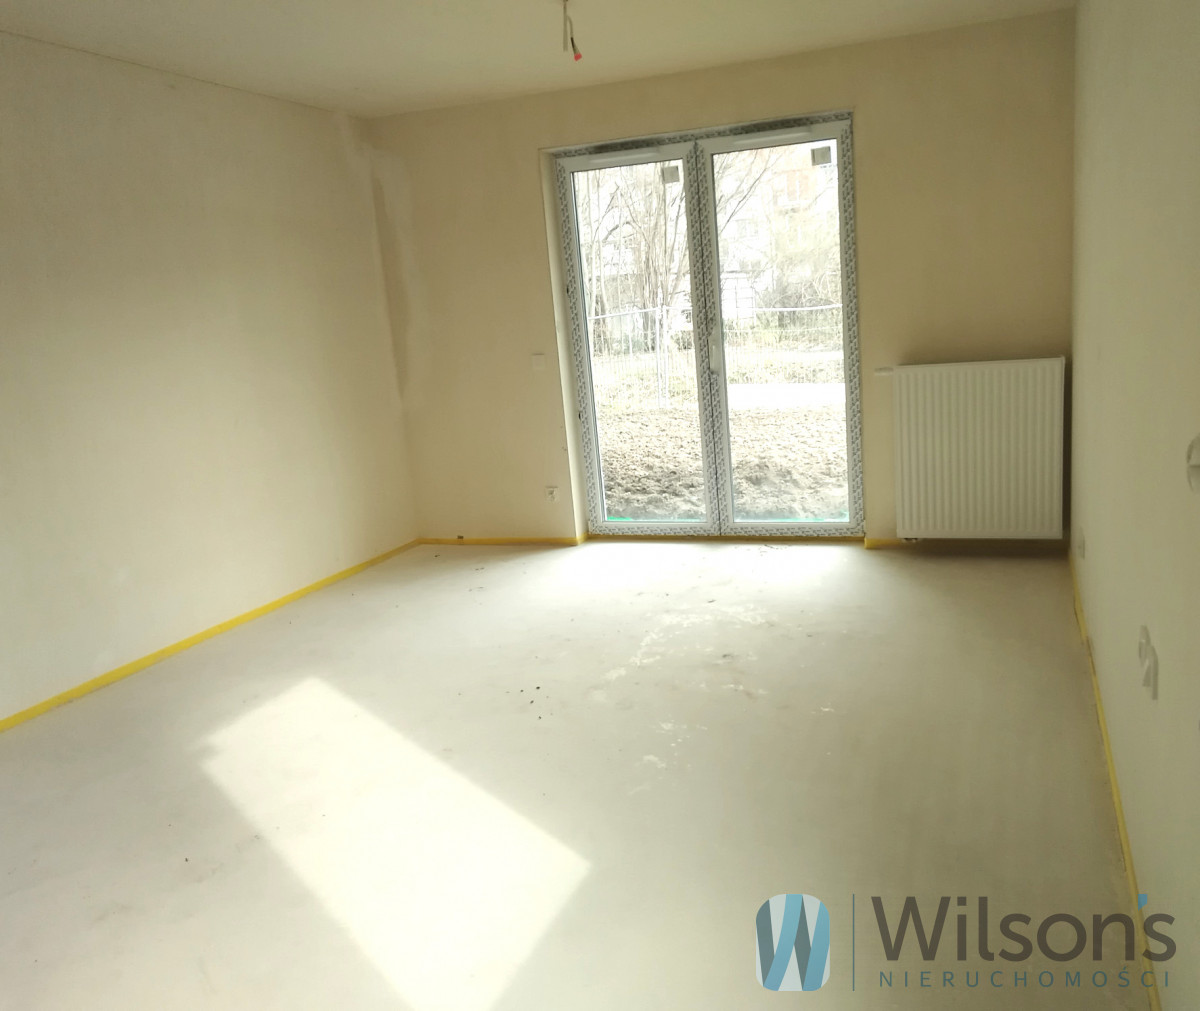 1-bedroom apartment with large garden ready to move in